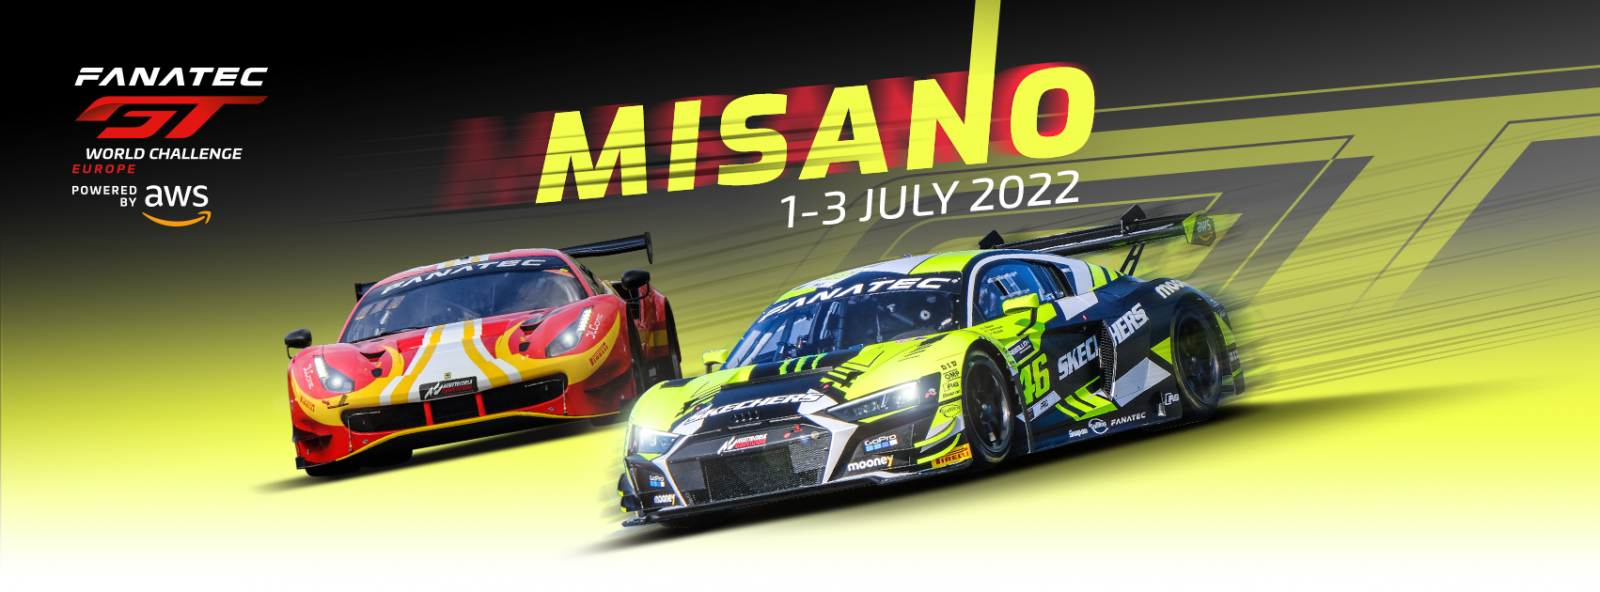 Expanded 27-car field primed for crucial Fanatec Sprint contest at Misano 